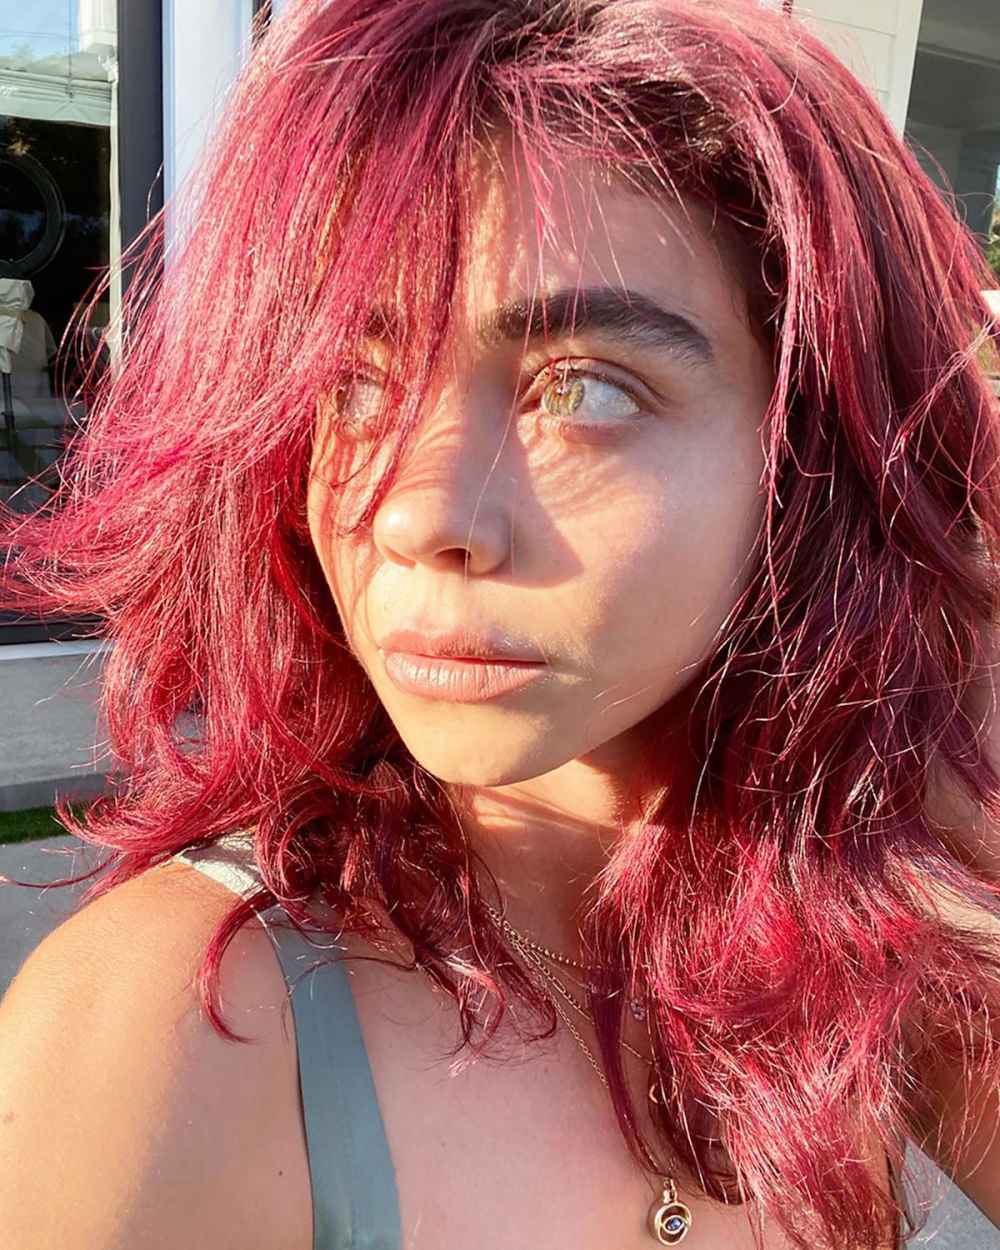 Whoa! Sarah Hyland's New Hair Color Is Seriously Bright